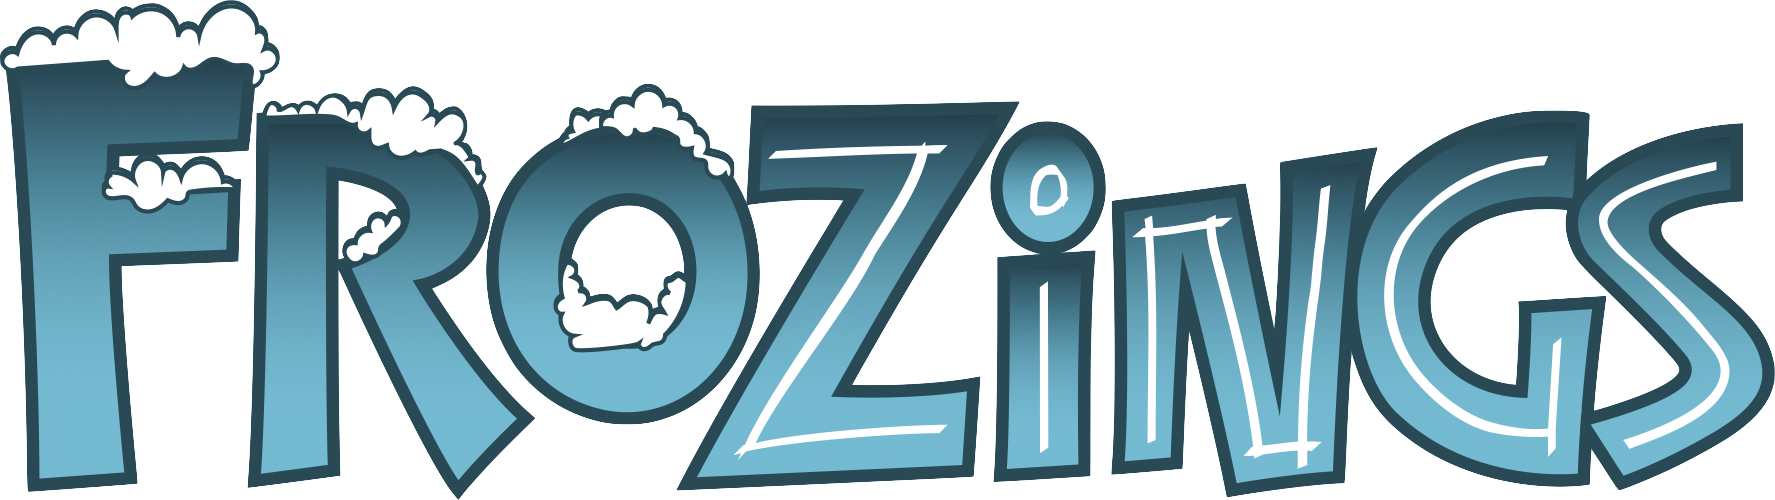 FroZings_Logo_trans.png